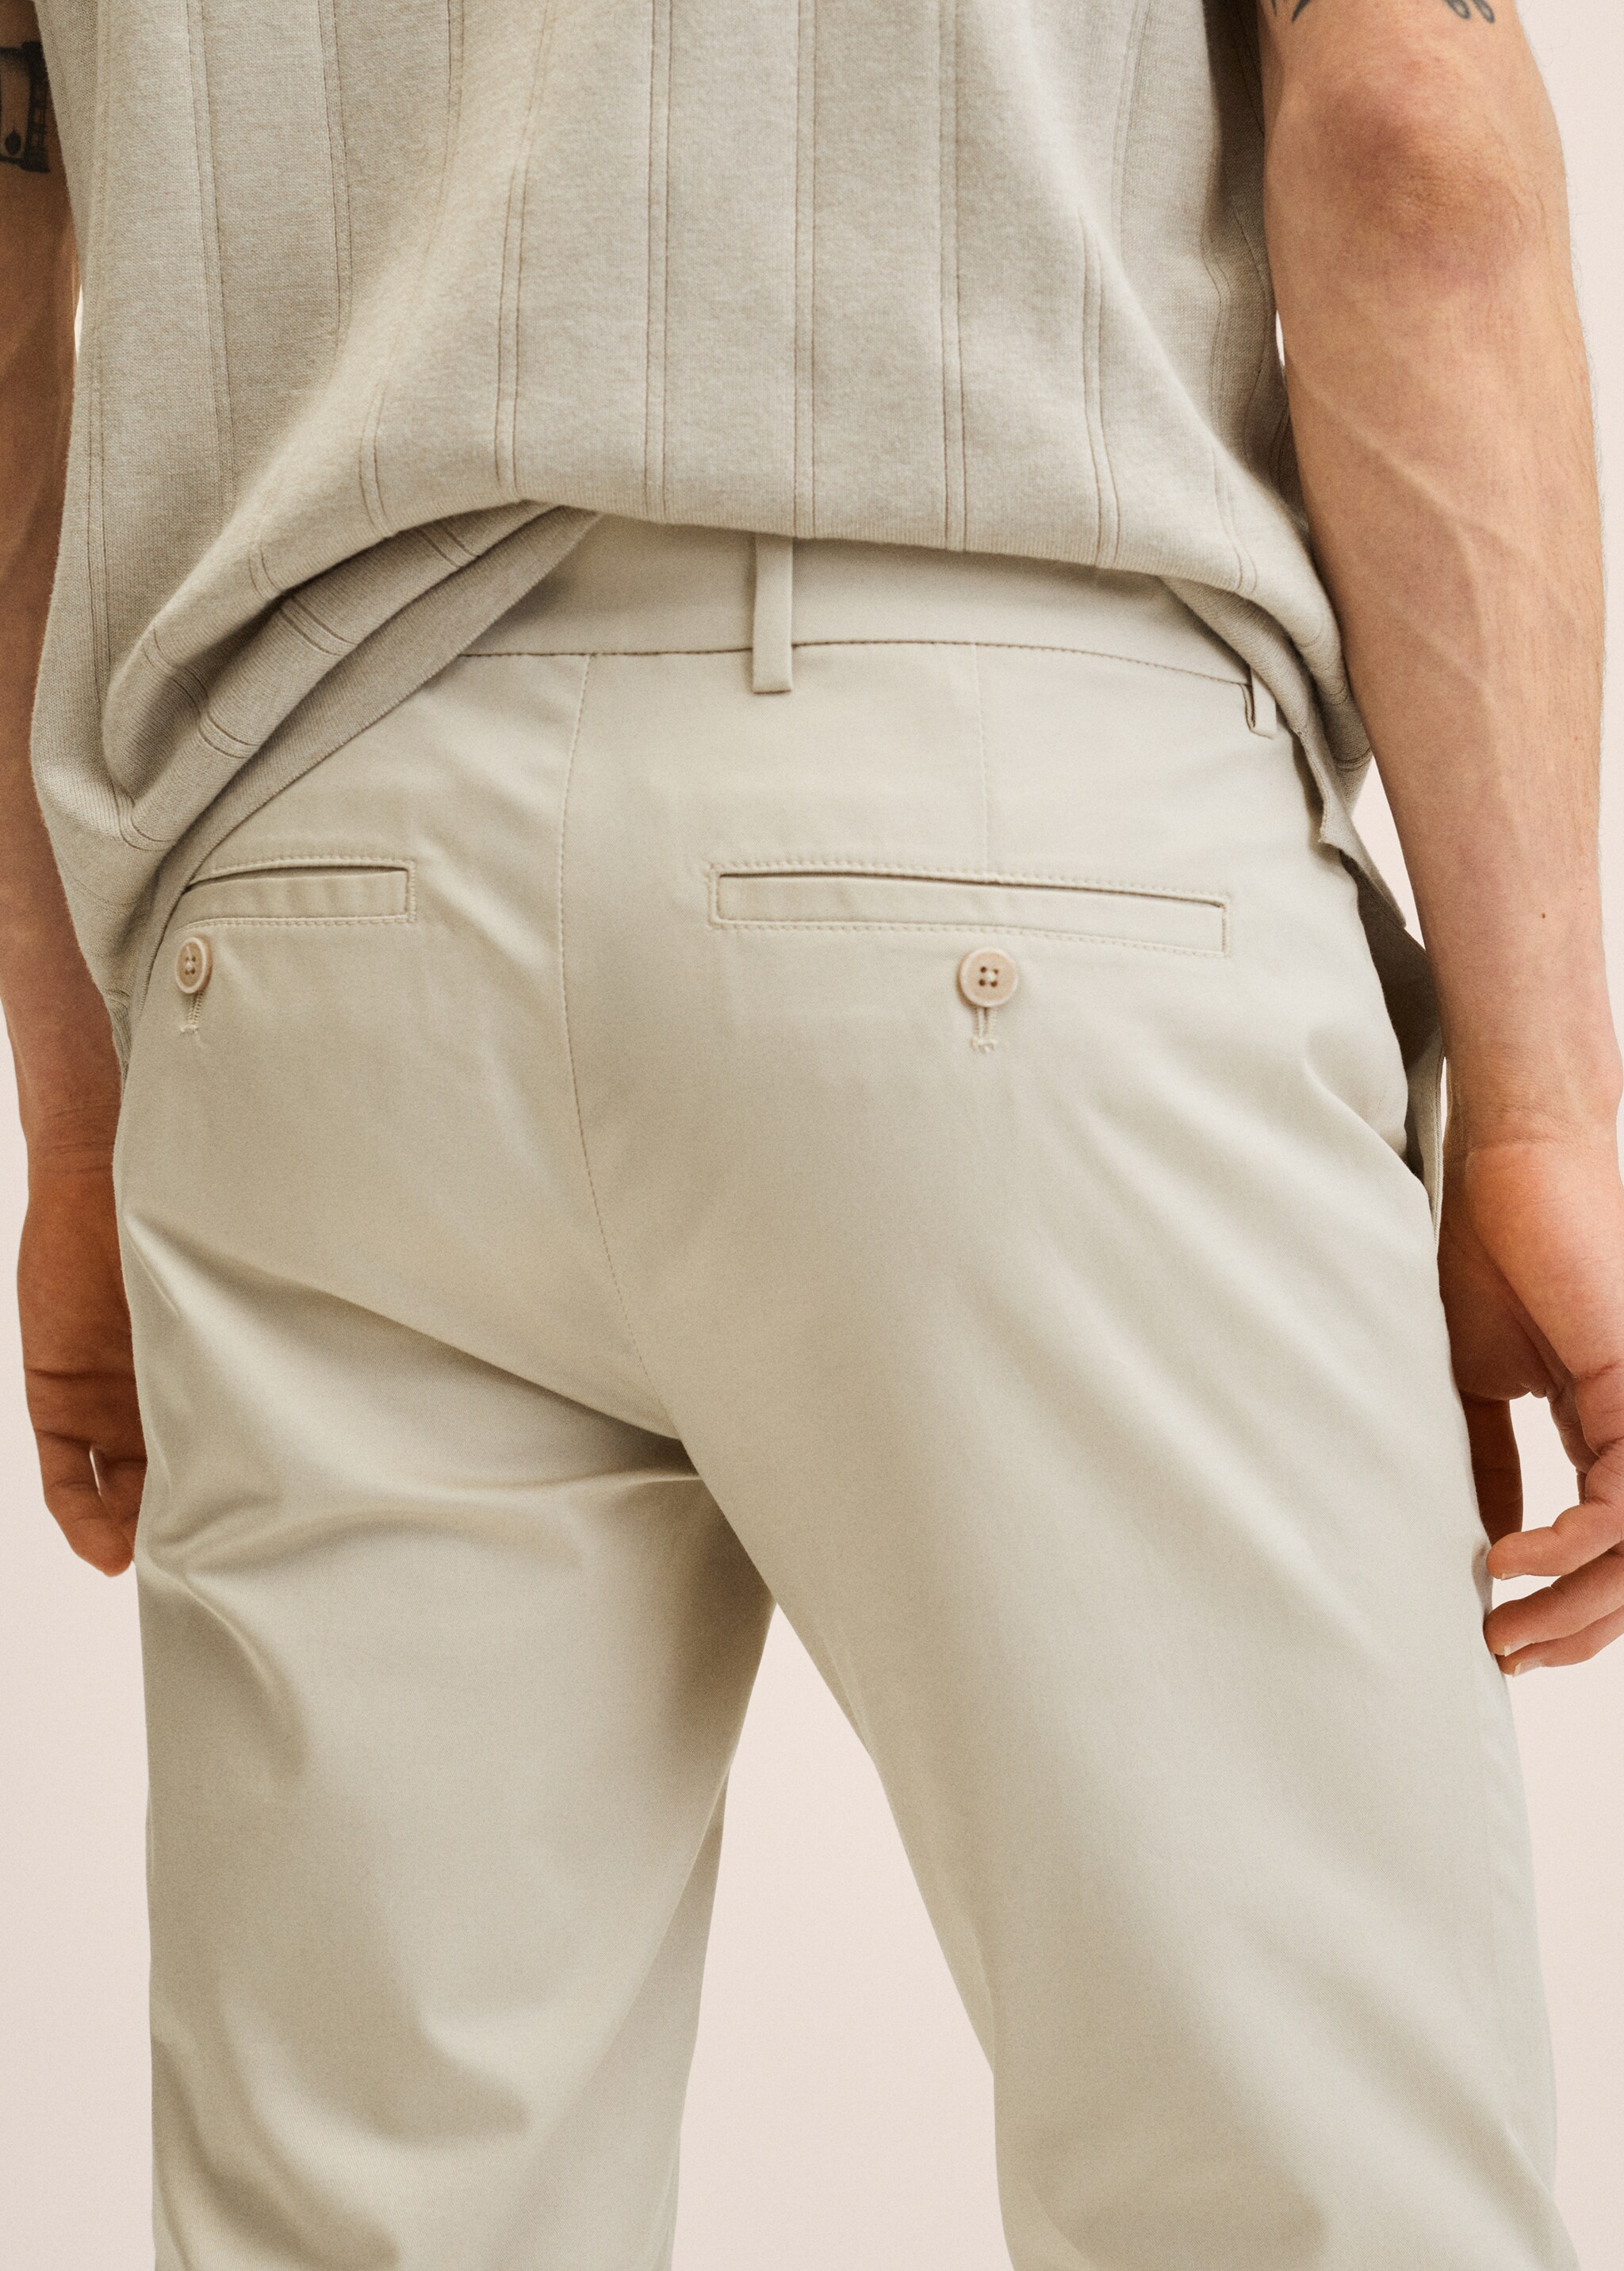 Skinny chino trousers - Details of the article 3